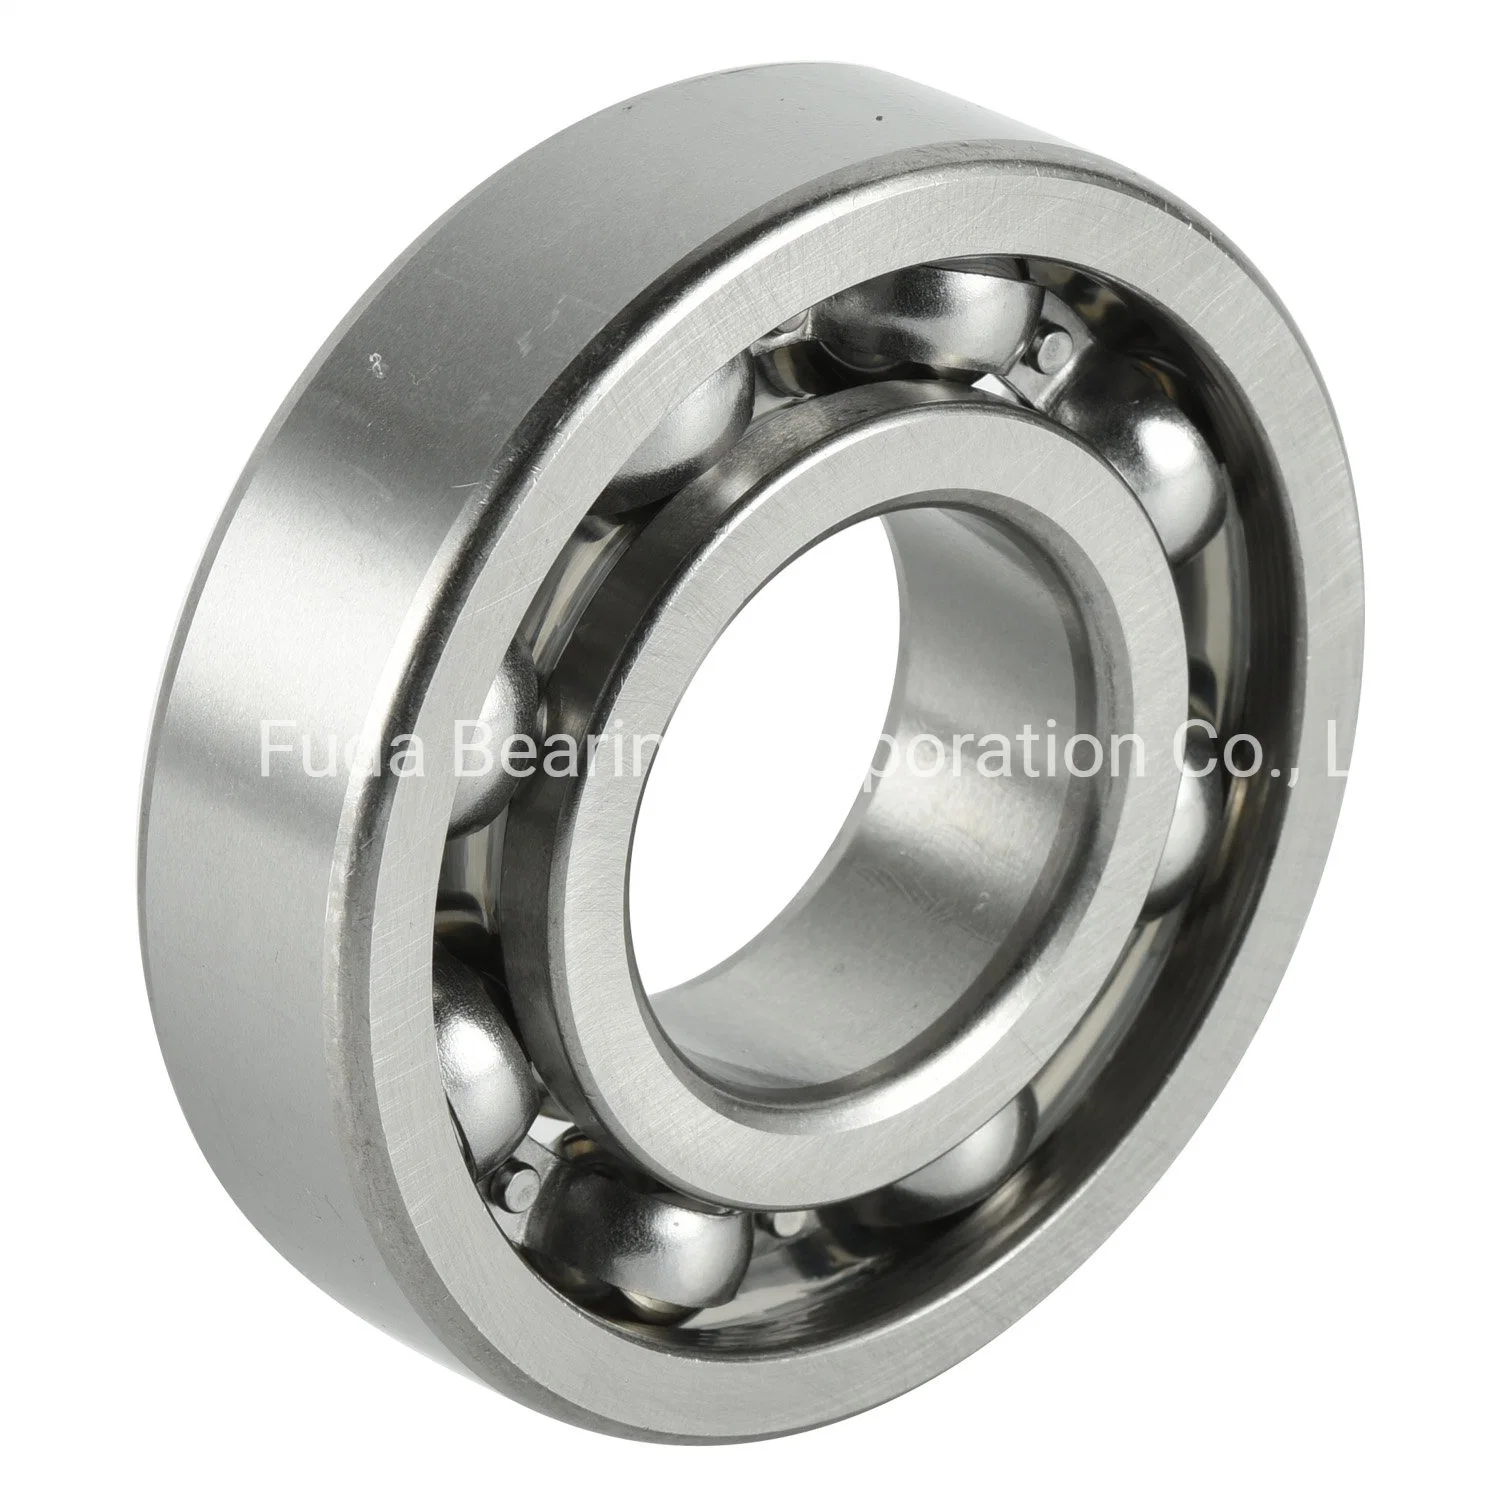 F&D Bearings 6202 2Z Electric tools accessories power tool accessories for Machinery parts